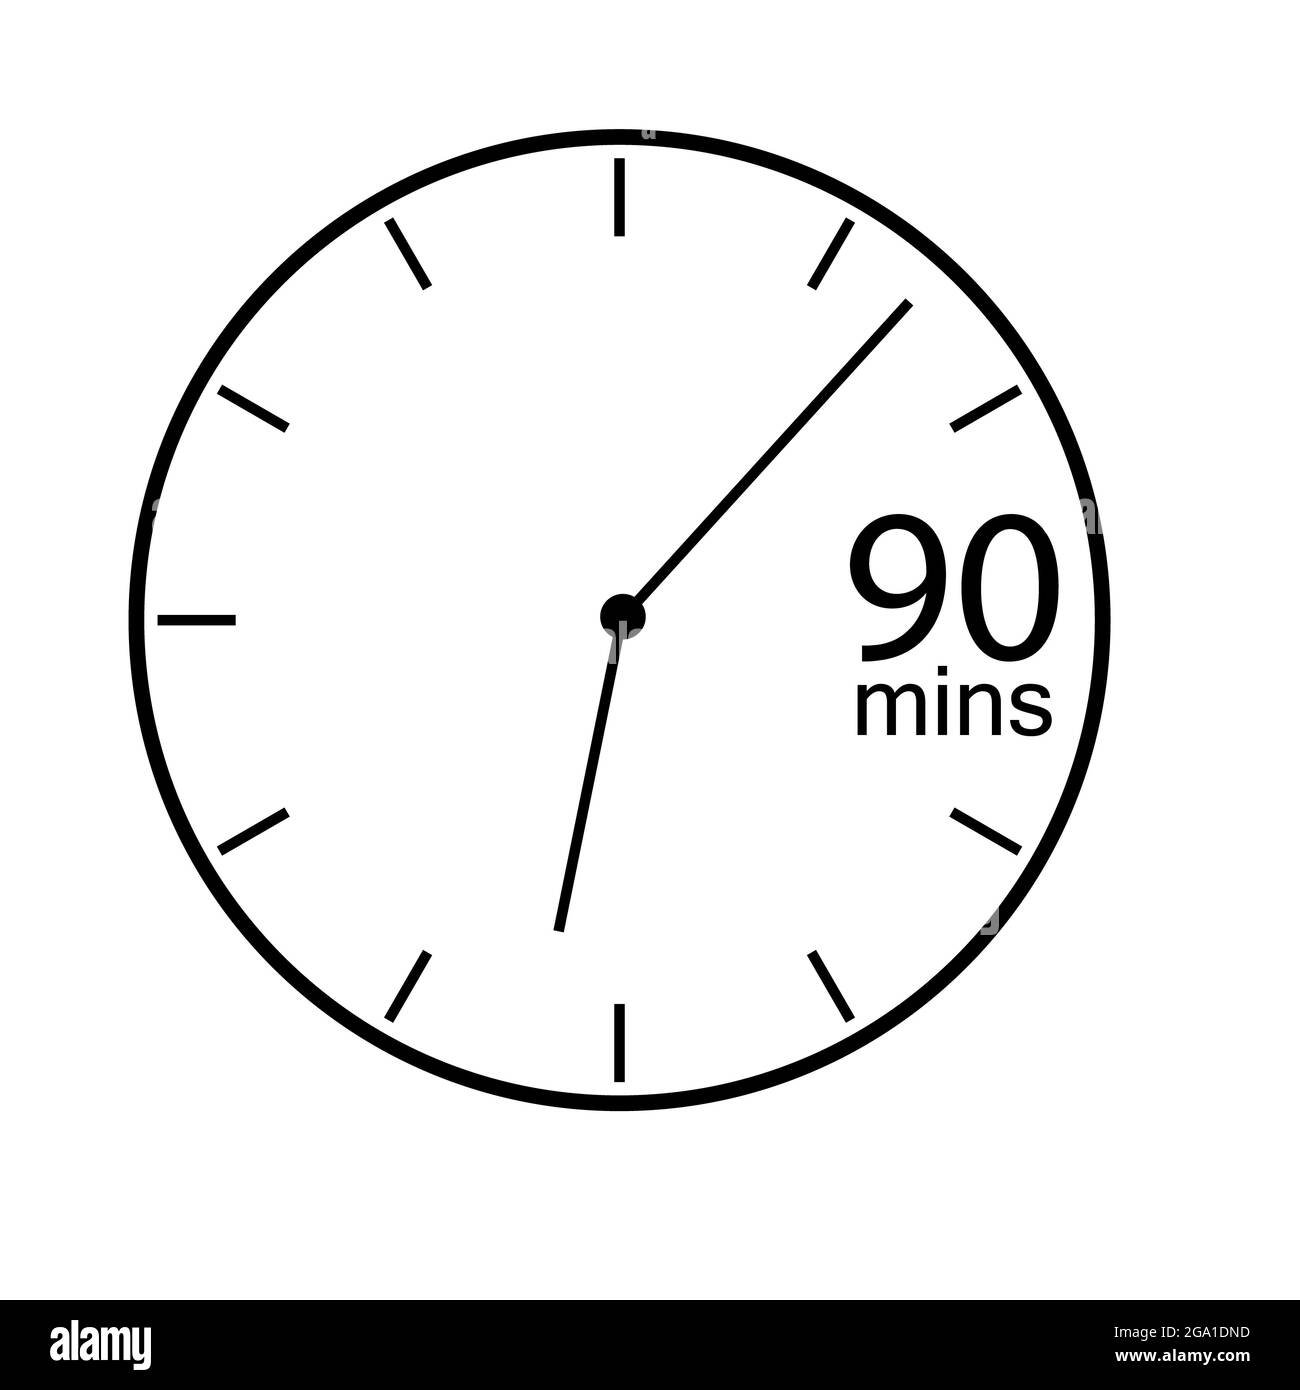 90 mins countdown timer icon on white background. stopwatch symbol. time  measurement sign. flat style Stock Photo - Alamy